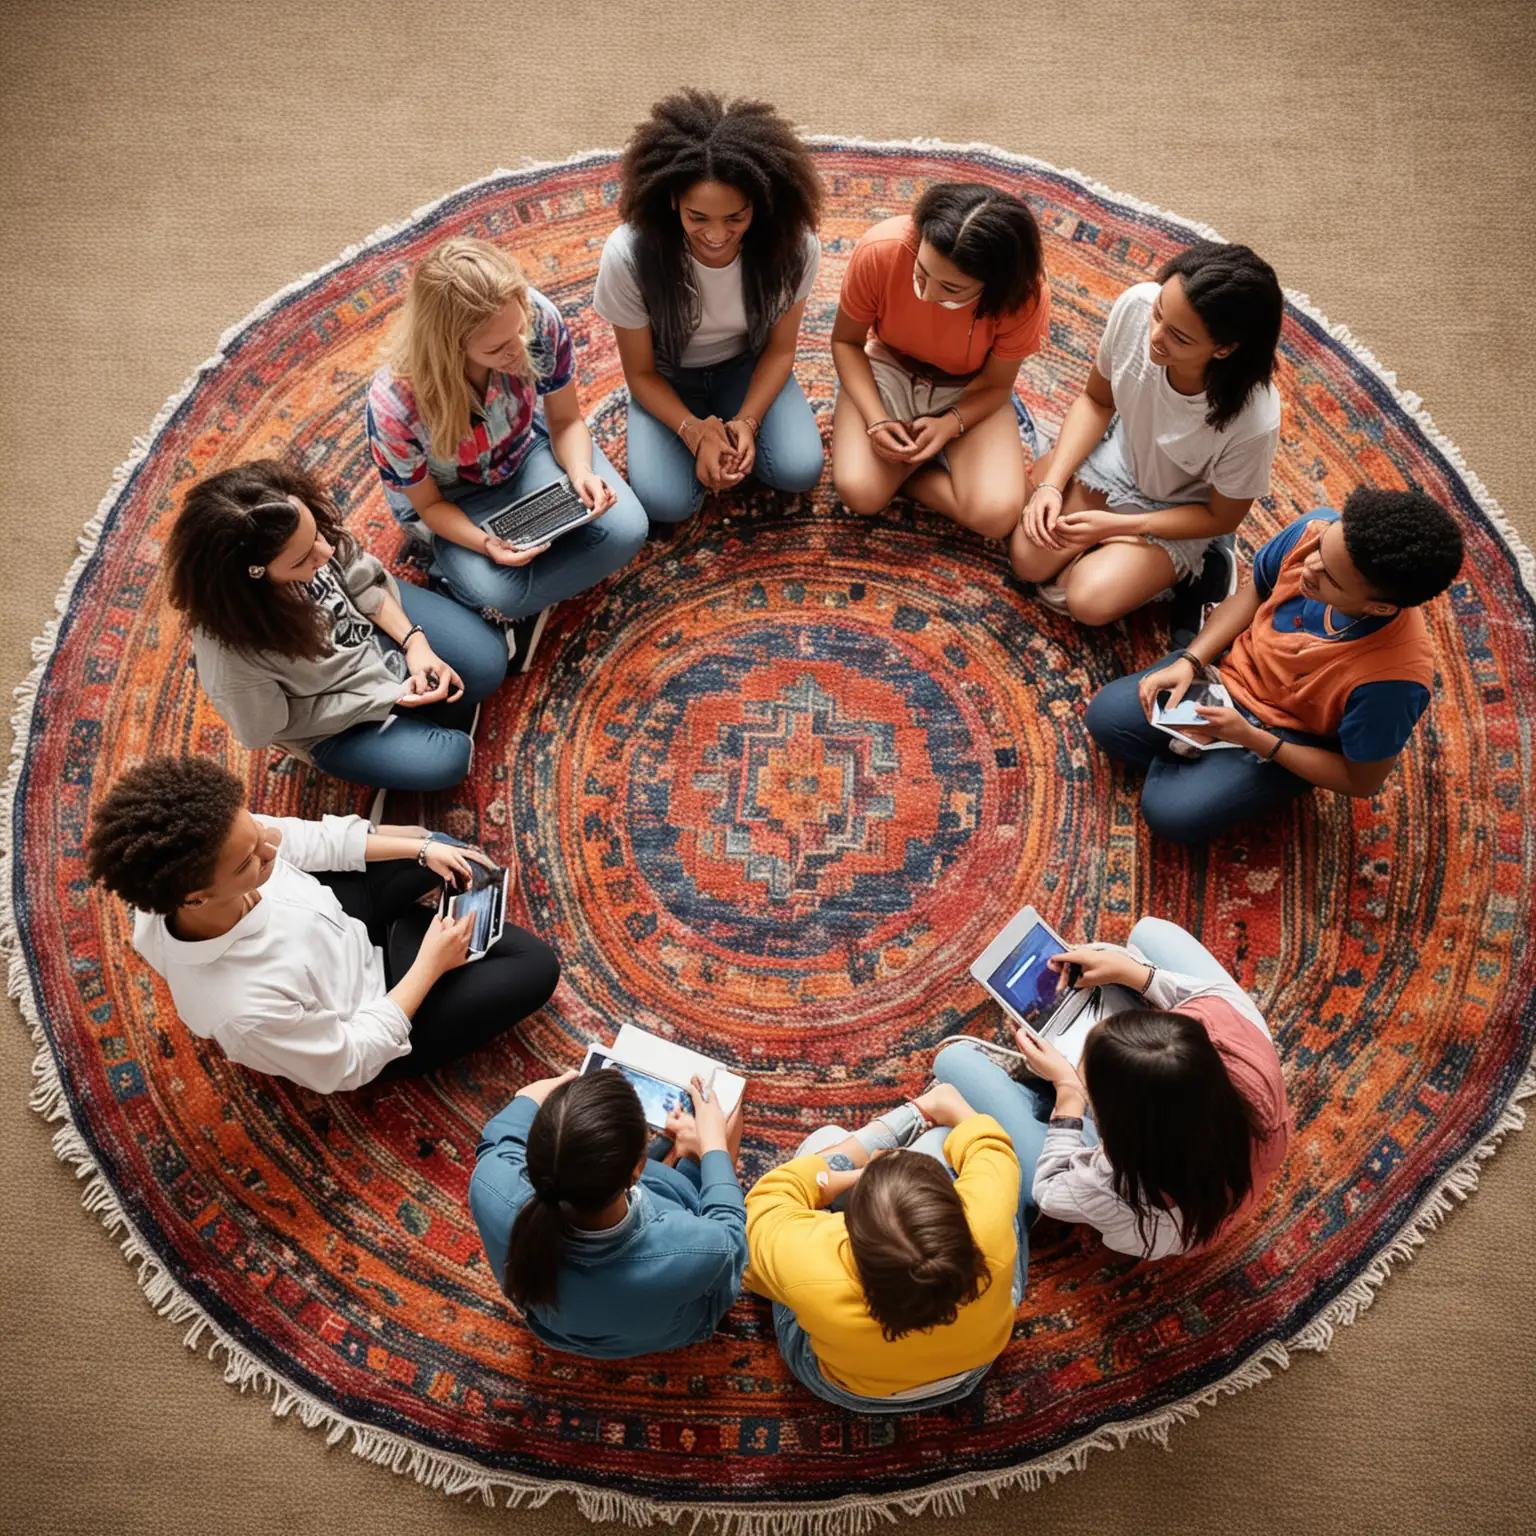 a diverse group of middle or high school students sitting in a circle on a colorful rug.  They are all engaged and excited, some holding tablets or laptops, while a teacher in the background facilitates a discussion. The overall feel should be bright, modern, and optimistic about the future of education. --ar 2:3 --sref https://s.mj.run/87Sjf94hFiI ::1.5 <https://s.mj.run/BdQFQve9VPQ>